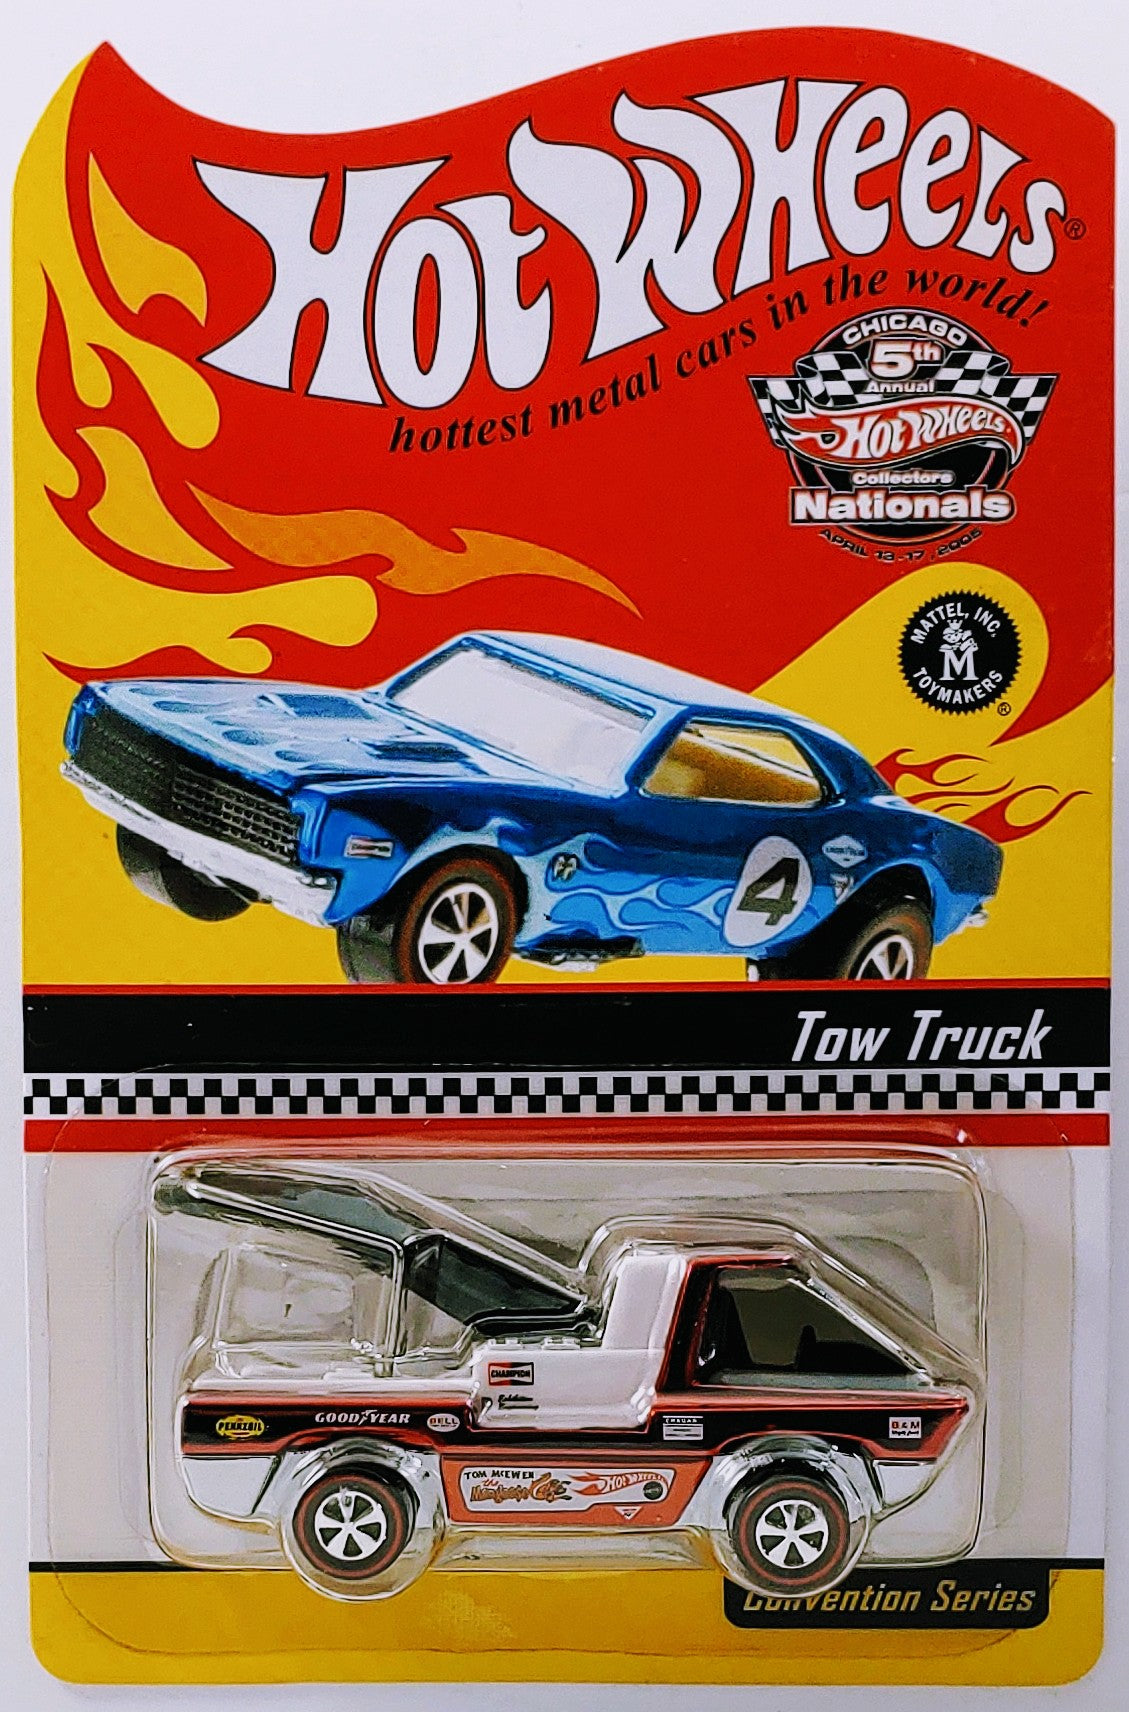 Hot Wheels 2005 - 5th Annual Collectors Nationals - Tow Truck - Spectraflame Red / Tom 'Mongoose' McEwen Graphics - Redlines - Limited to 3,000 - Kar Keeper